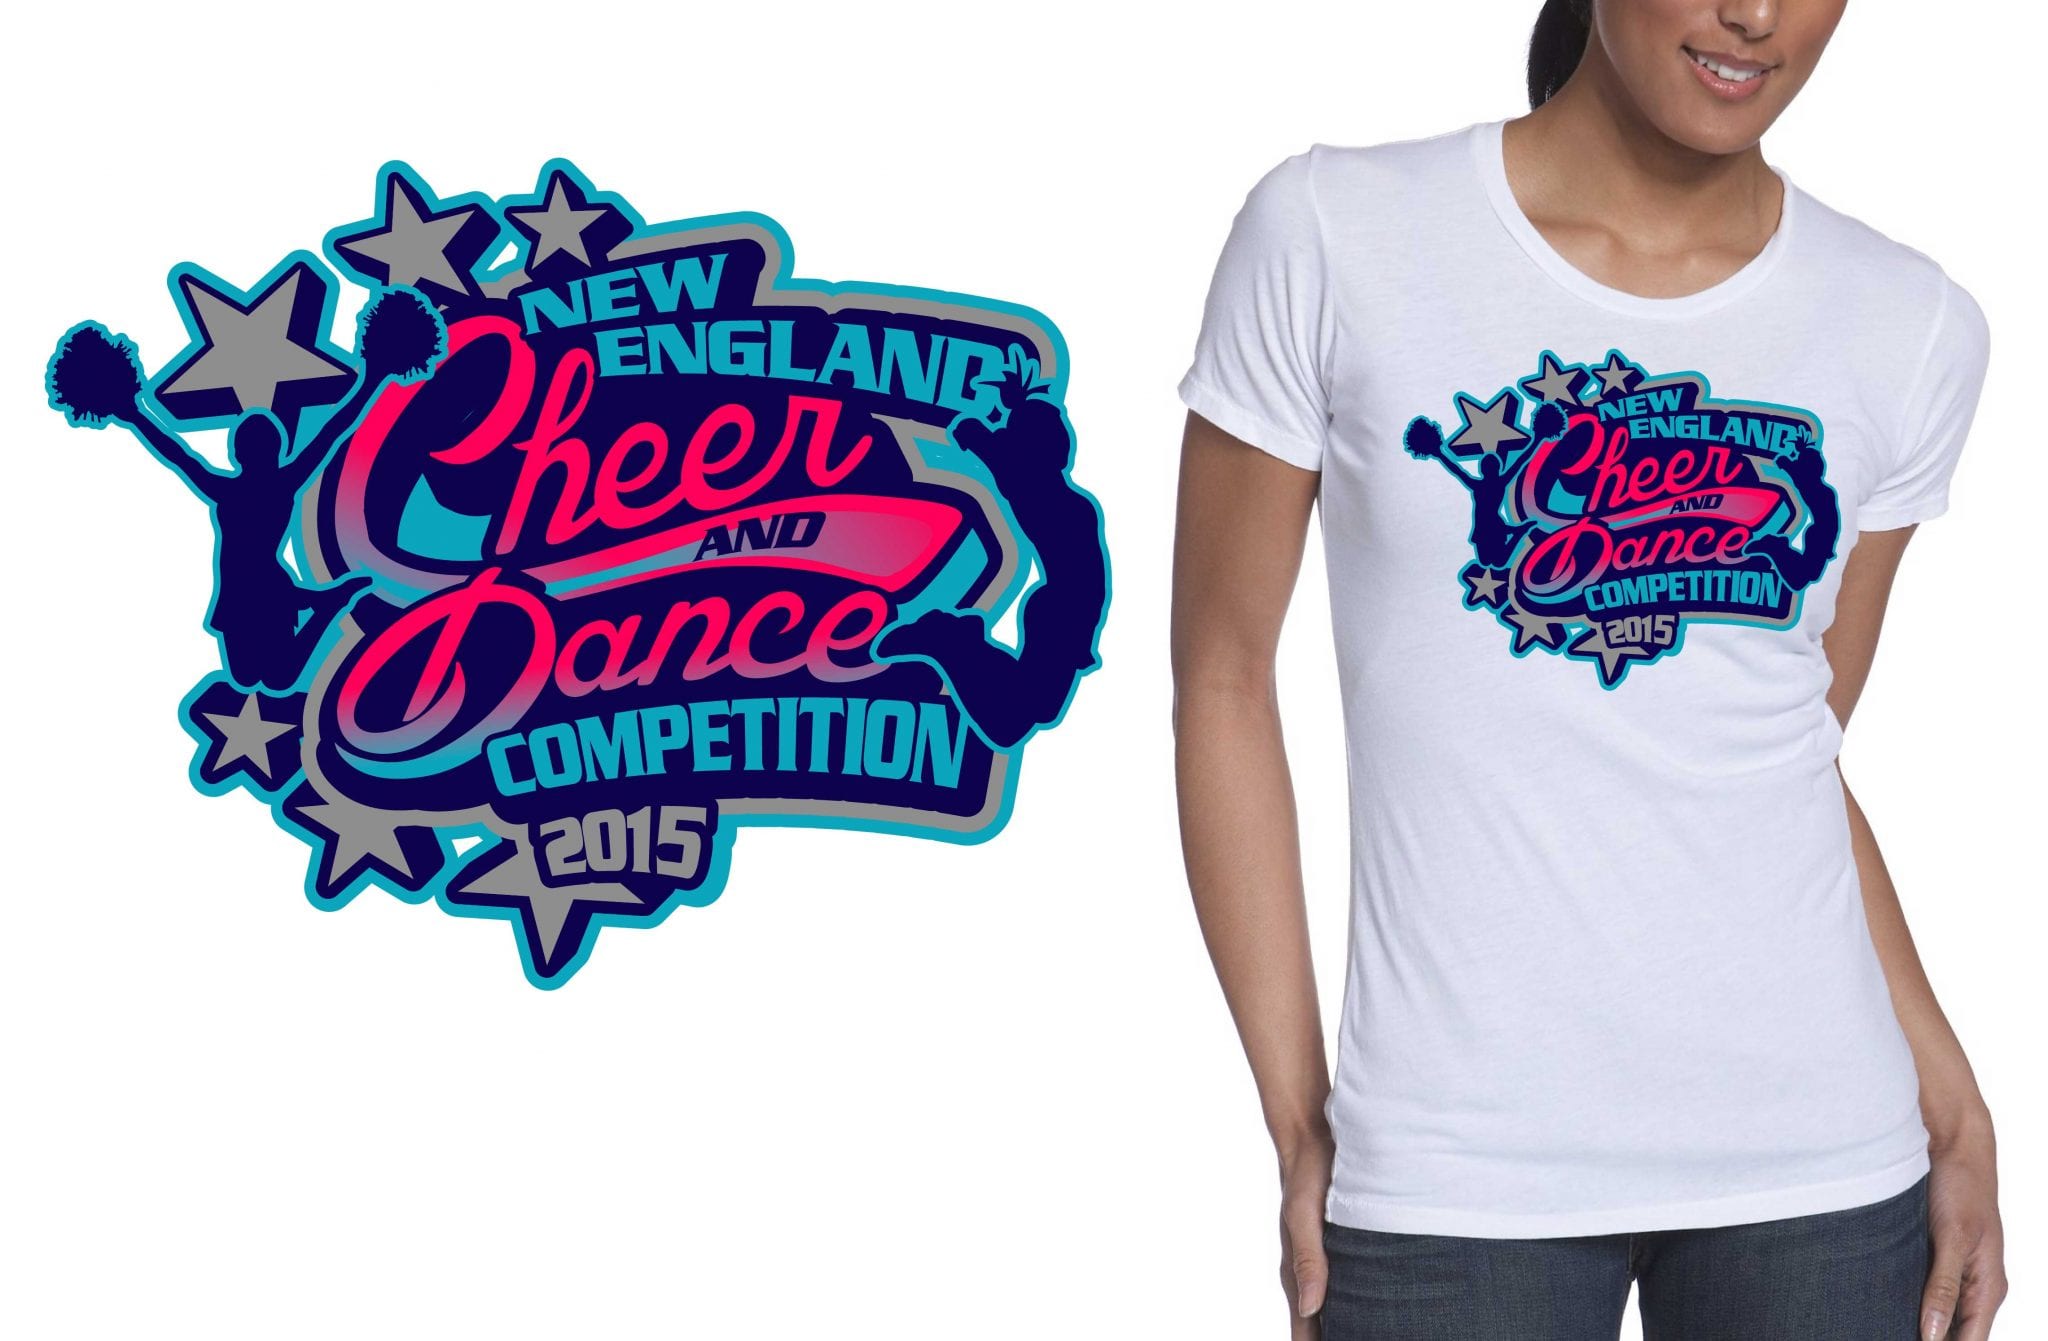 2015-new-england-cheer-and-dance-competition-best-tshirt-logo-design